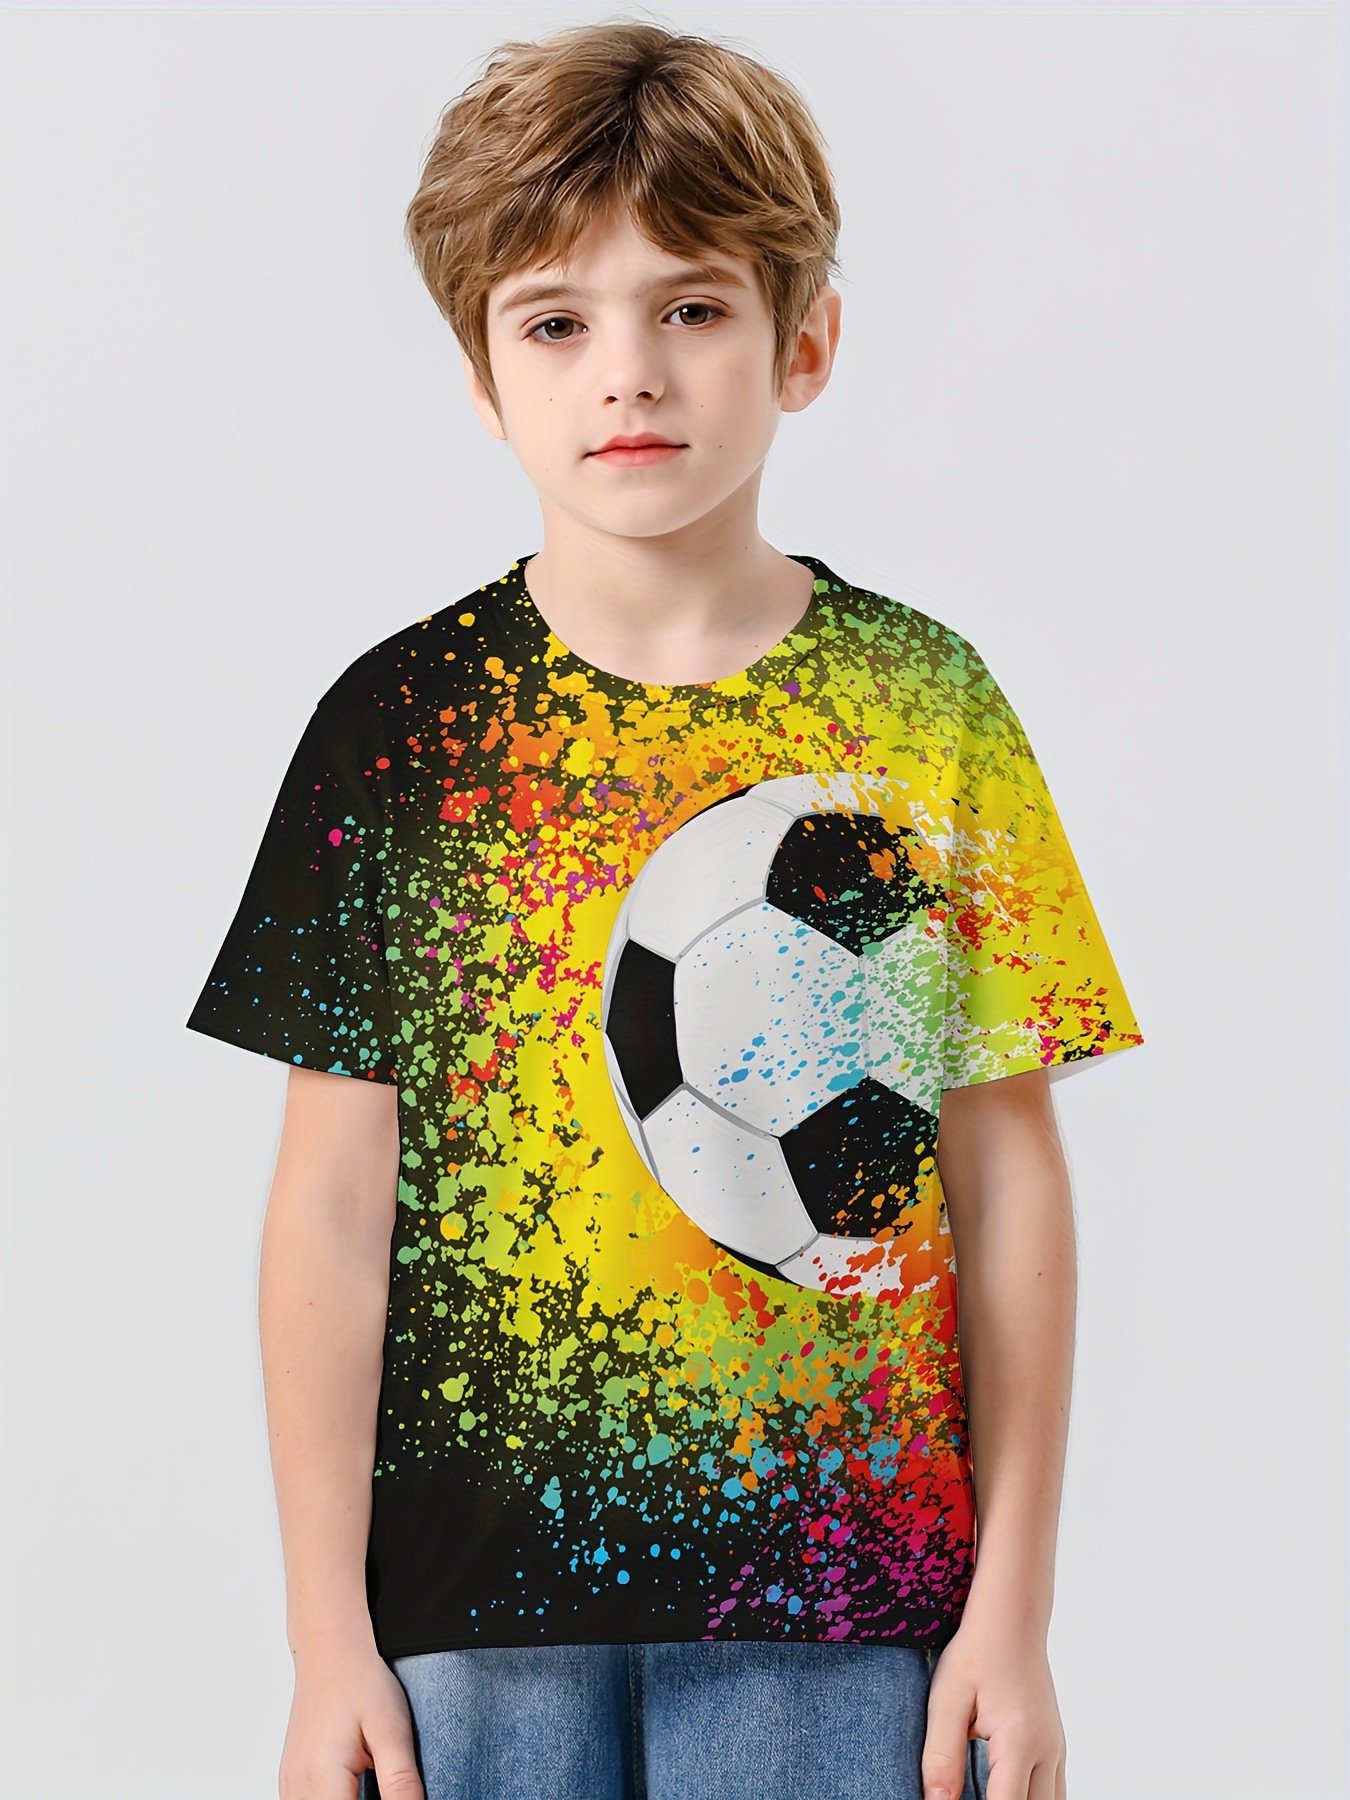 JUMPING BEANS Sports Ball Soccer Boy's Long Sleeve Boys Shirt 4T NEW WITH  TAGS